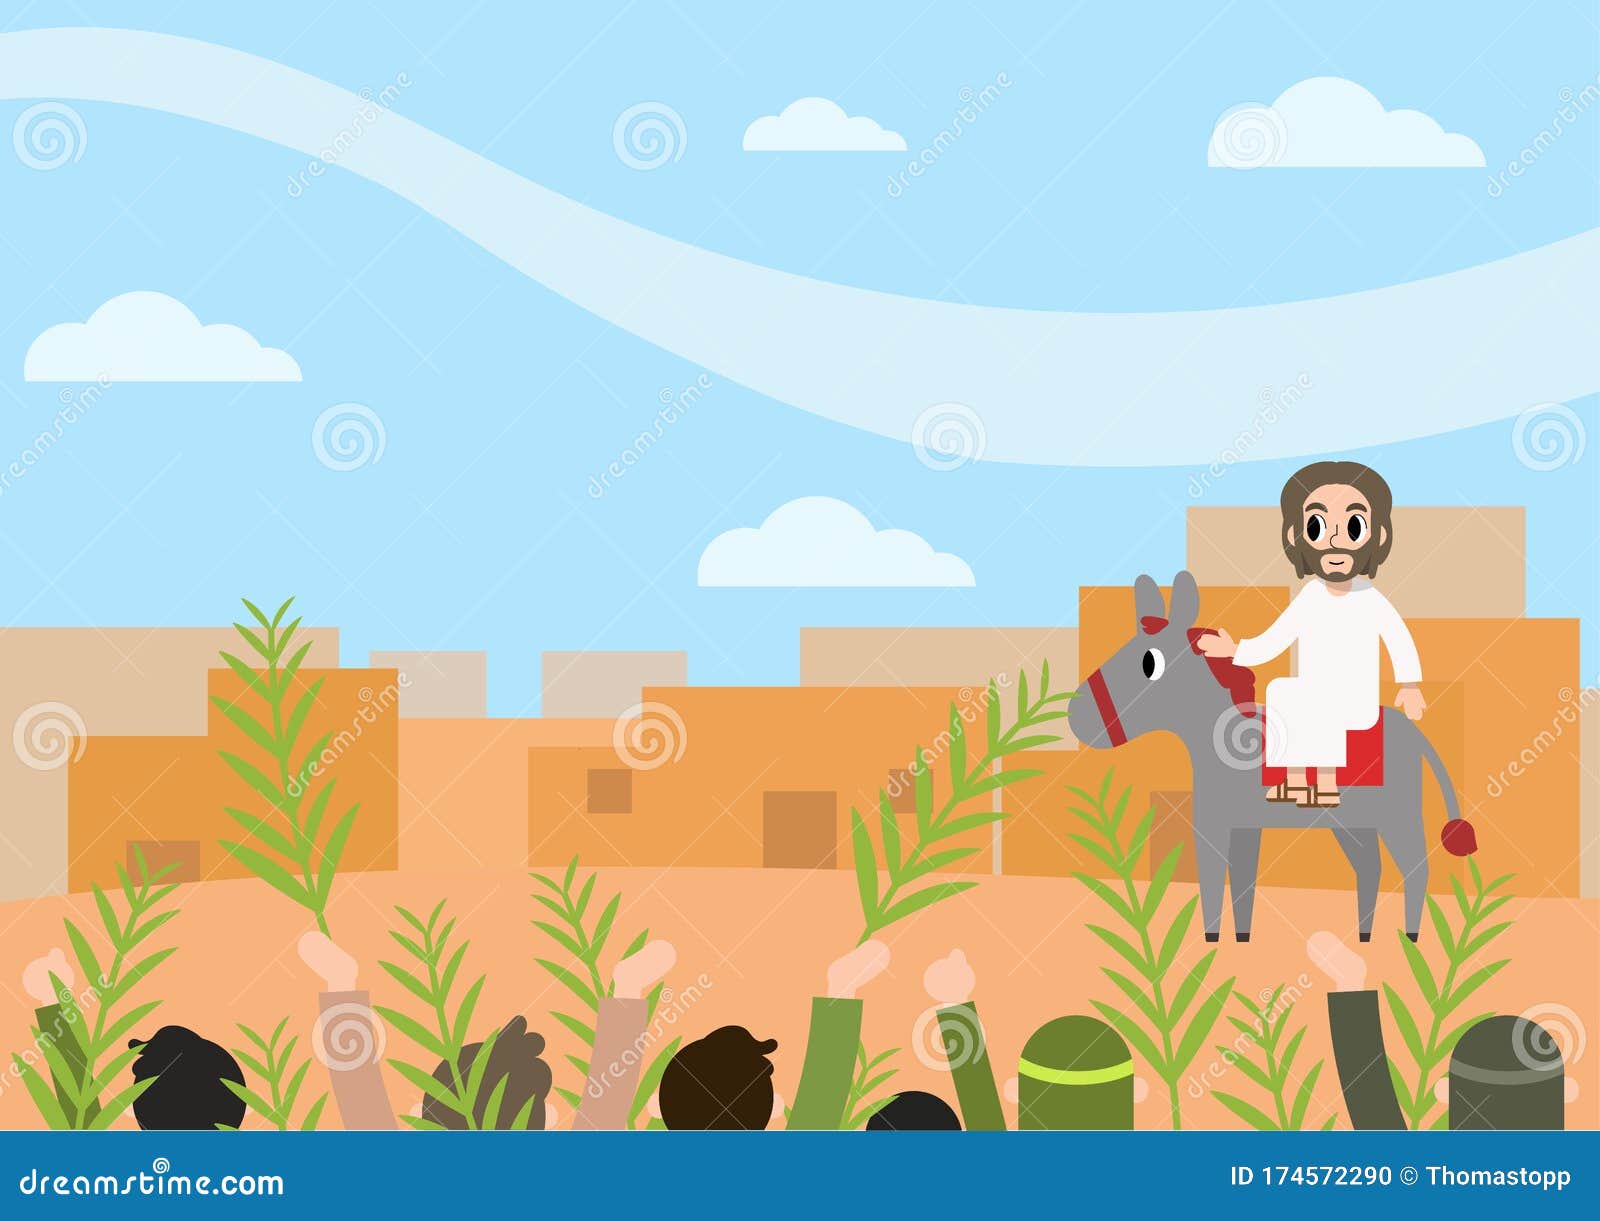 A cartoon vector of Jesus entering Jerusalem on a donkey and people waving their hands and palm leaves along the way. Bible